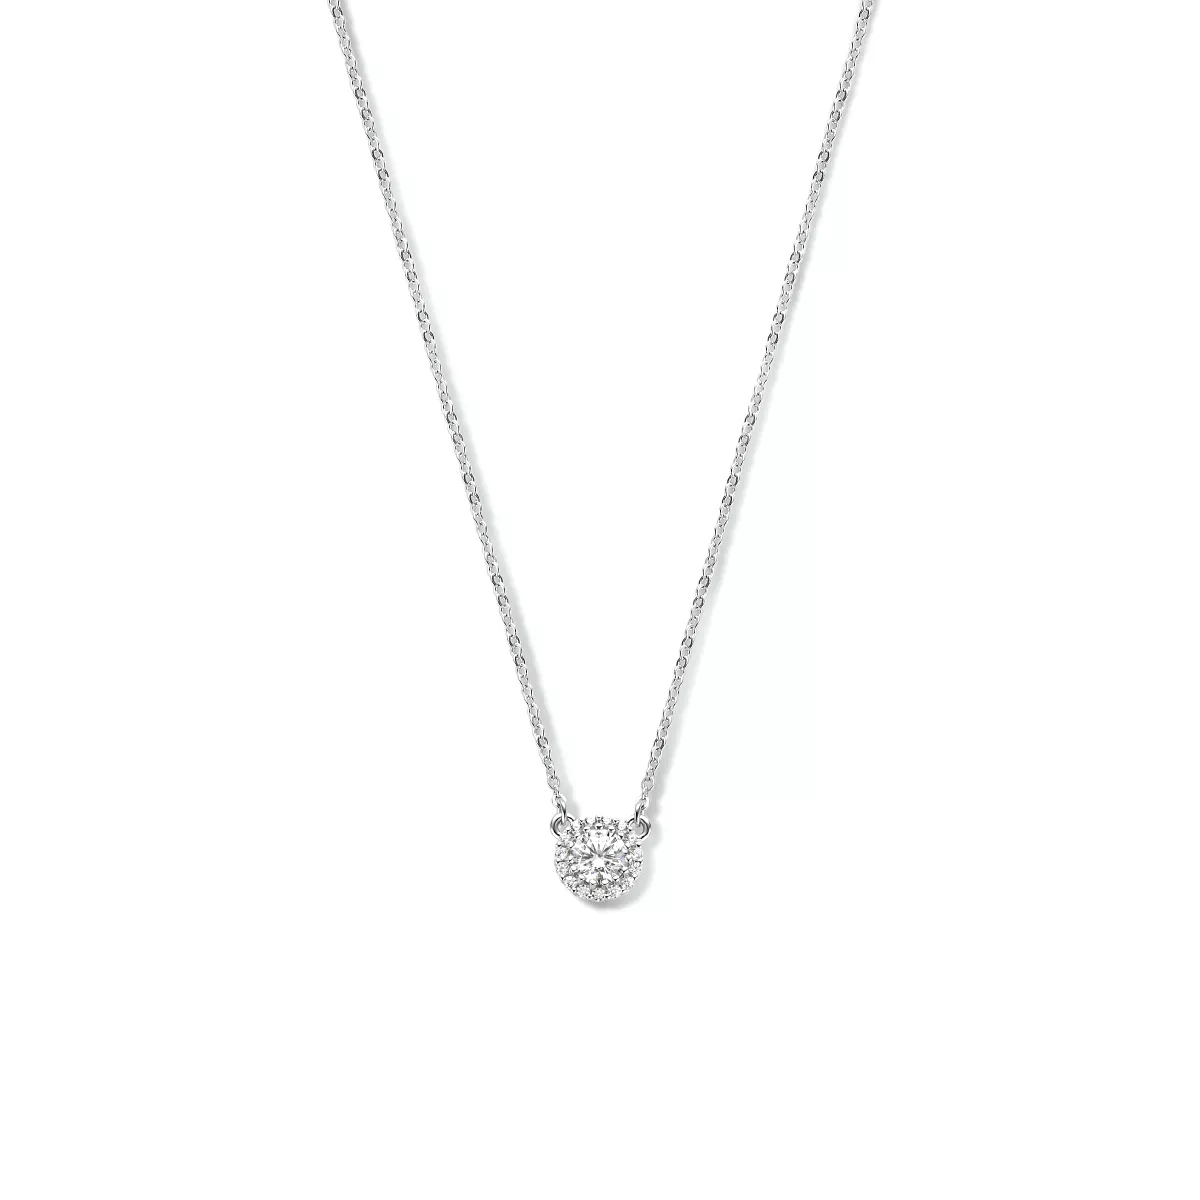 Ketting Halo Anker zilver 8 mm 41-45 cm